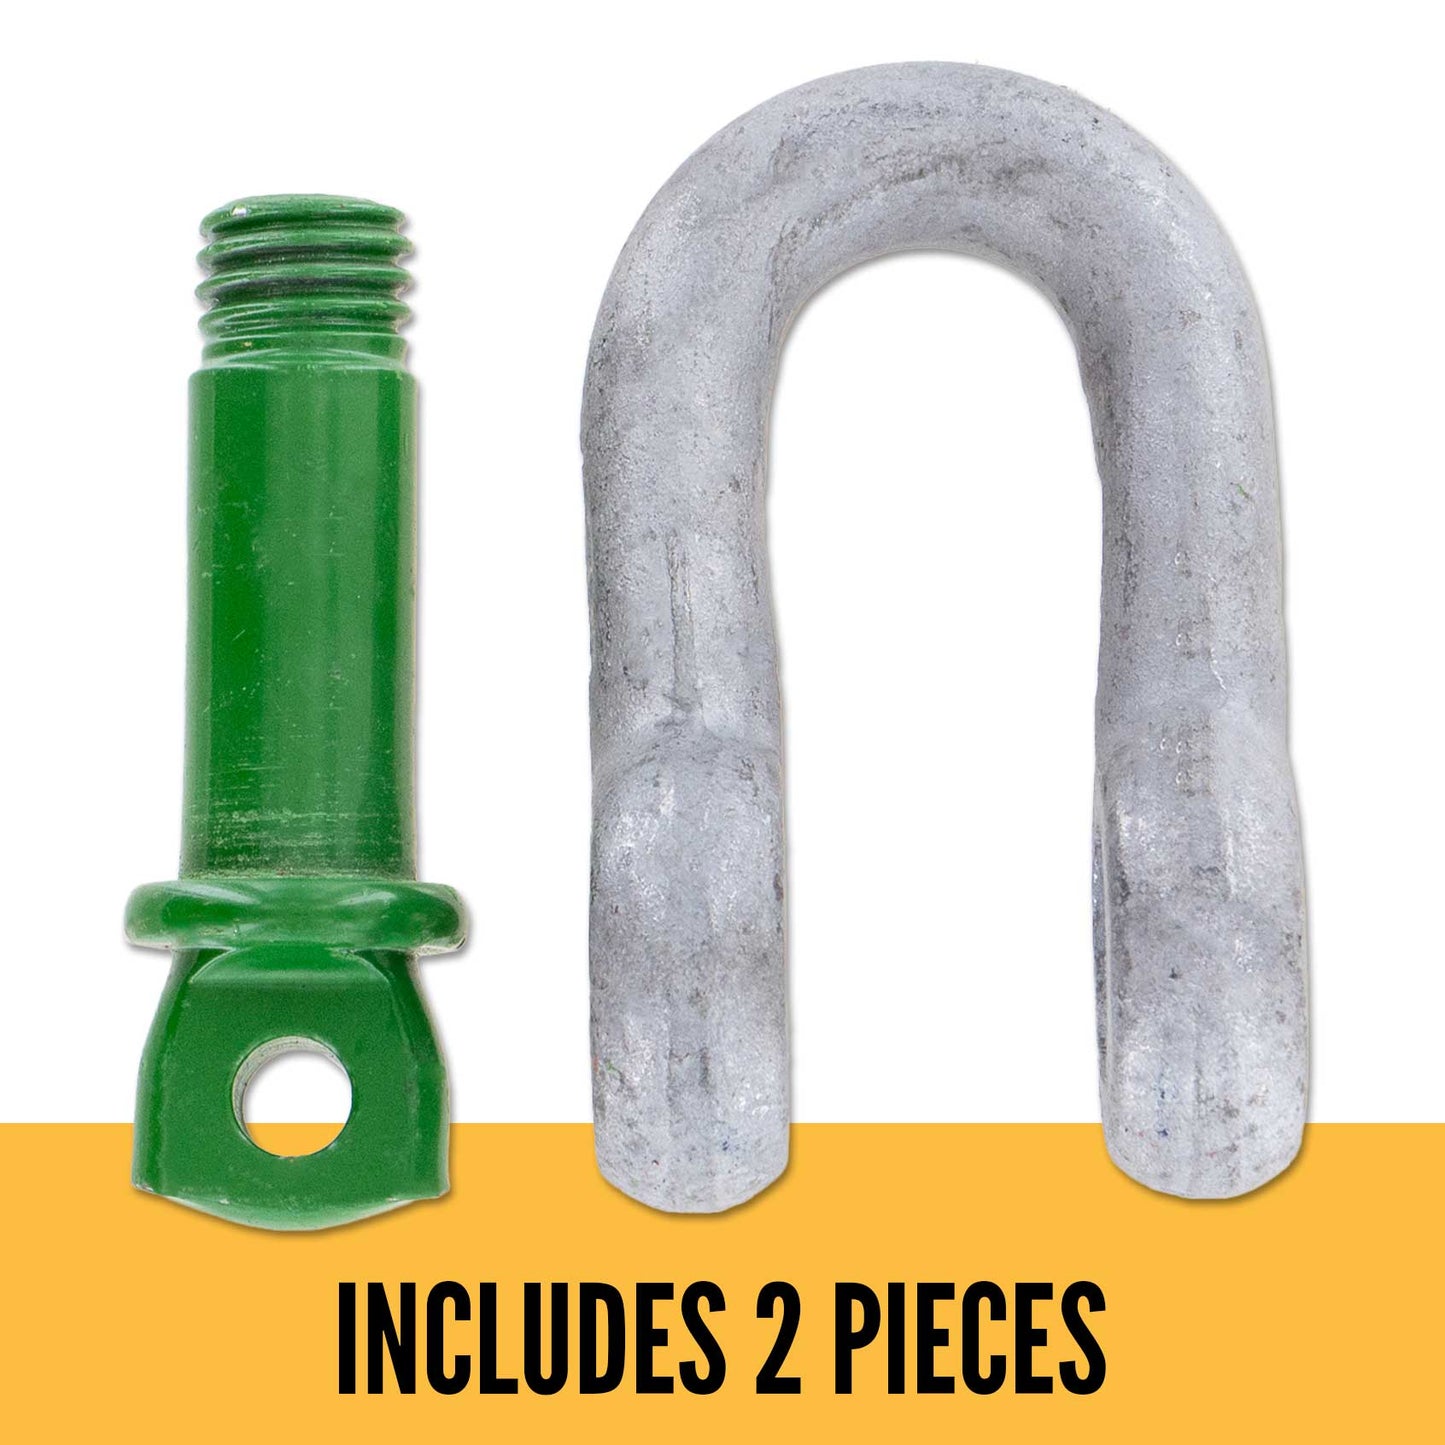 5/8" Van Beest Green Pin® Screw Pin Chain Shackle | G-4151 - 3.25 Ton parts of a shackle